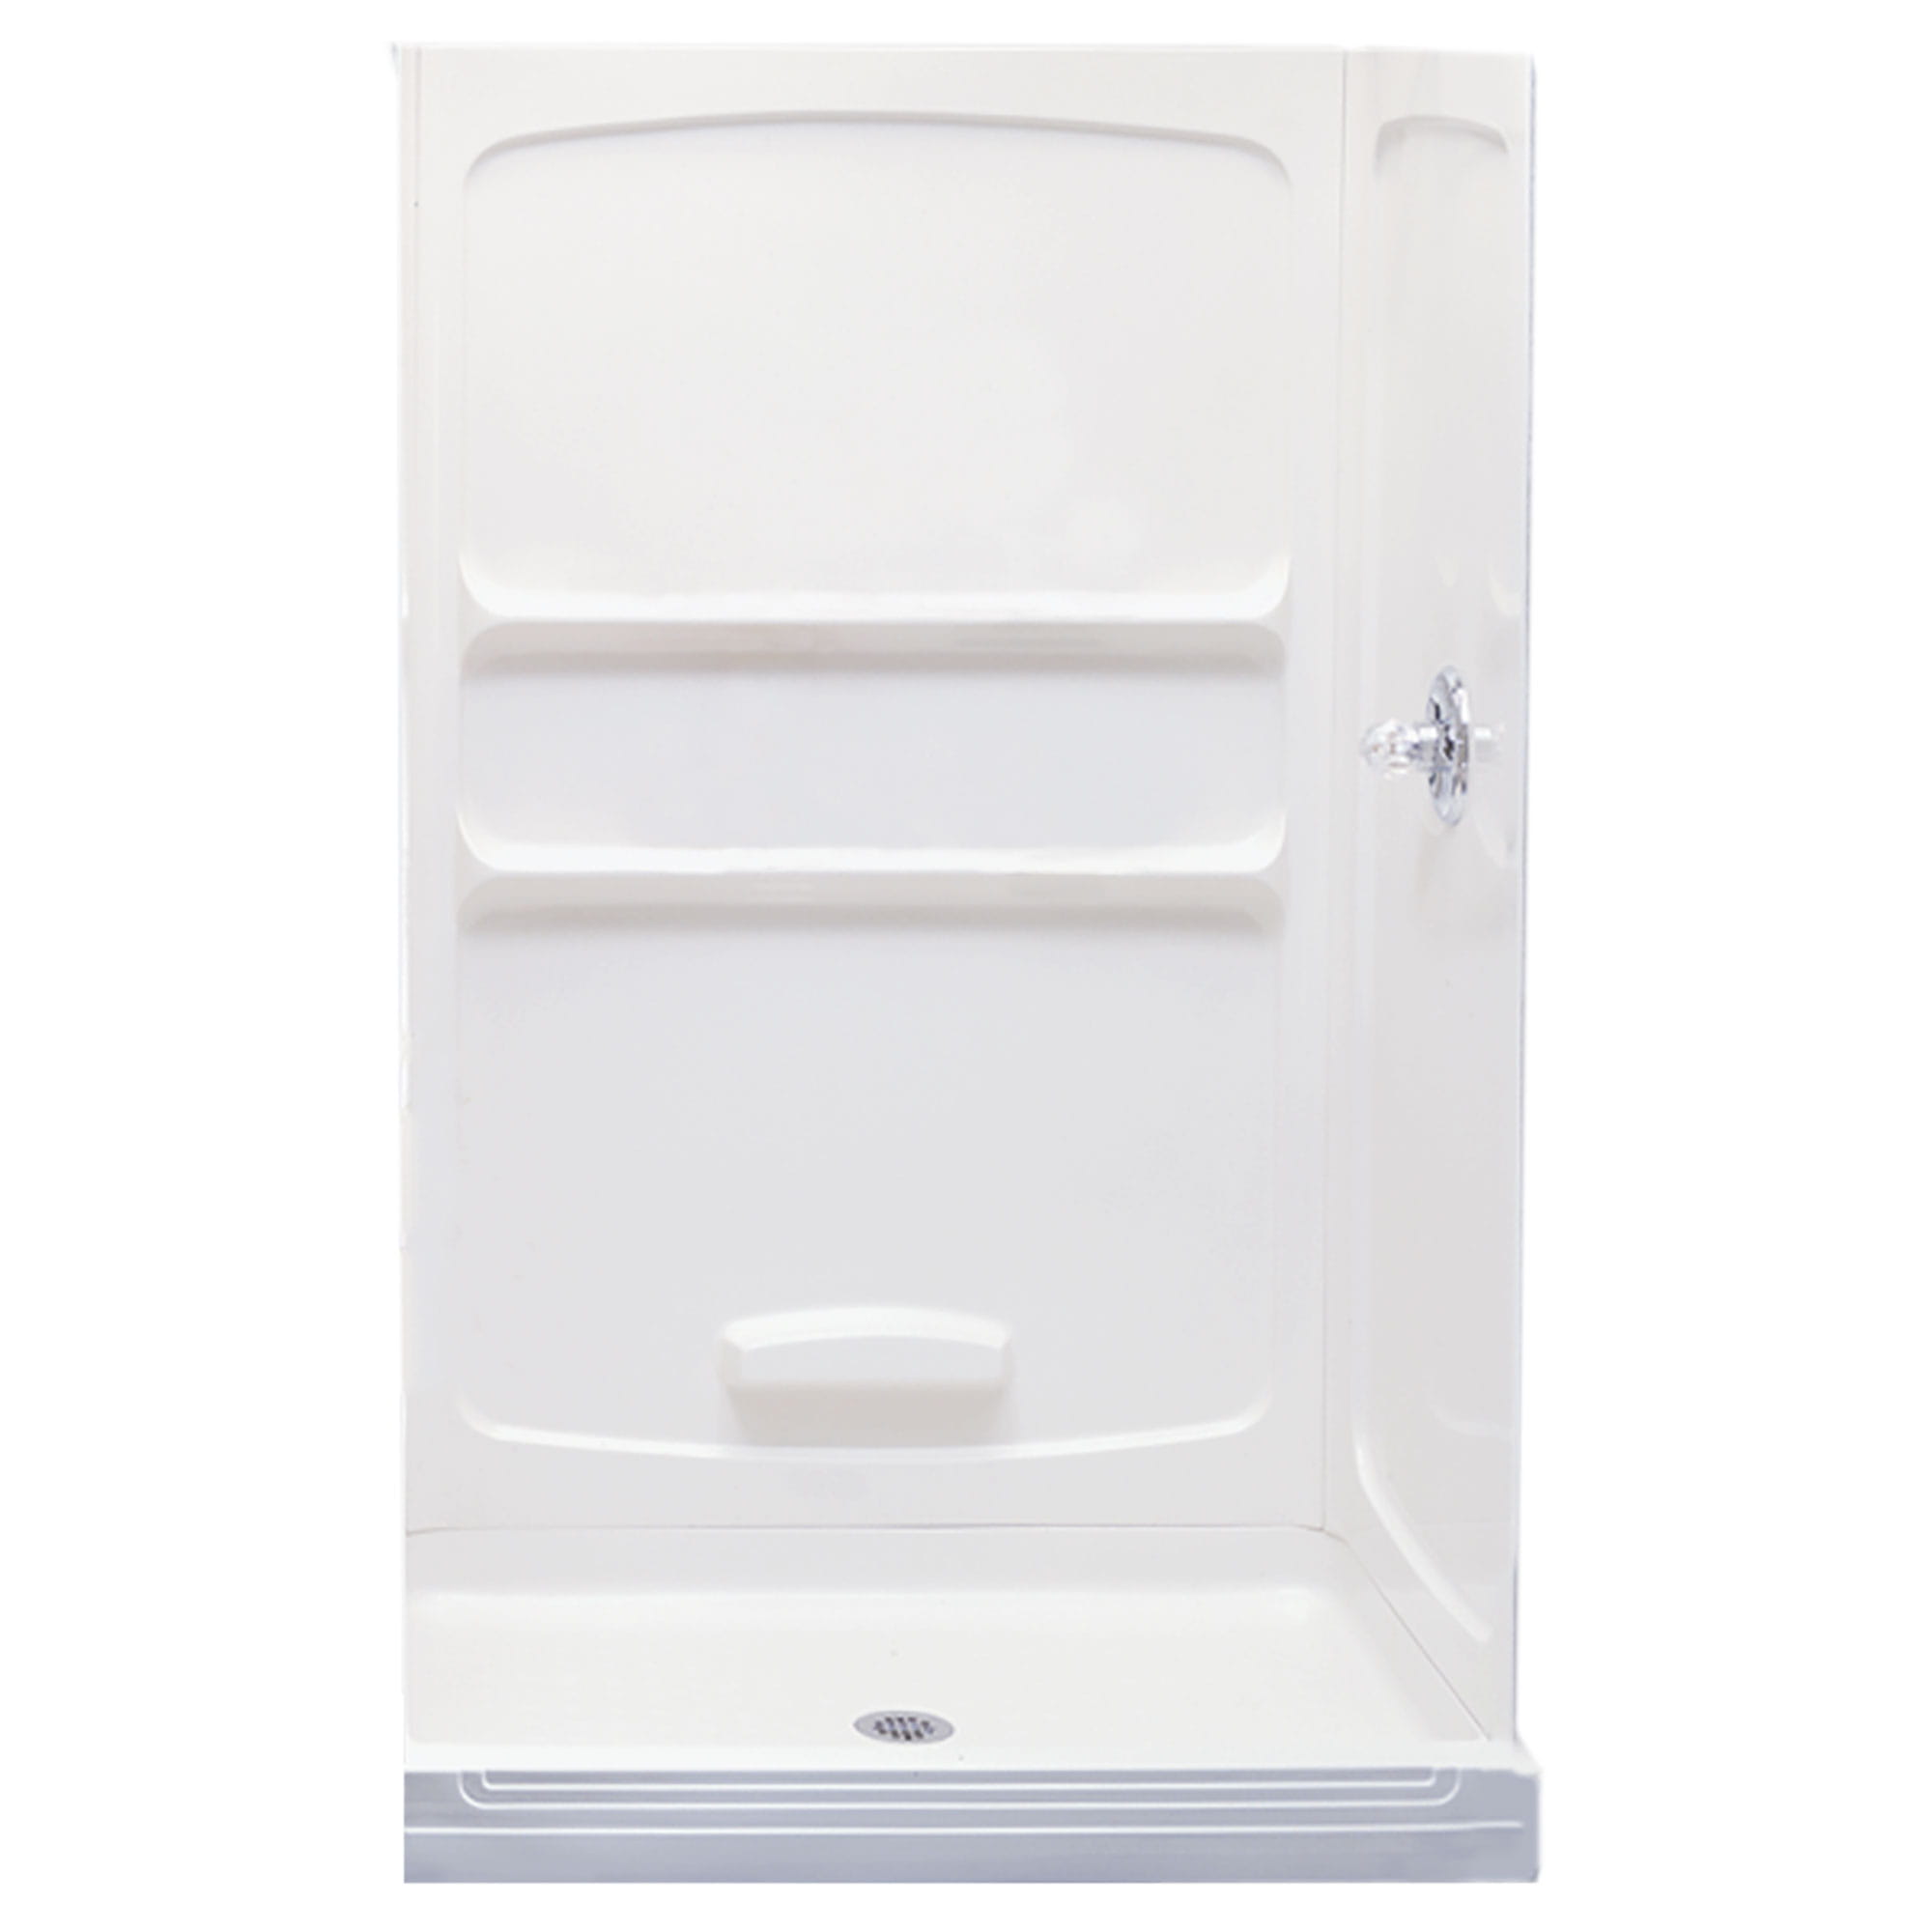 Town Square 48 Inch by 34 Inch Alcove Shower Base WHITE